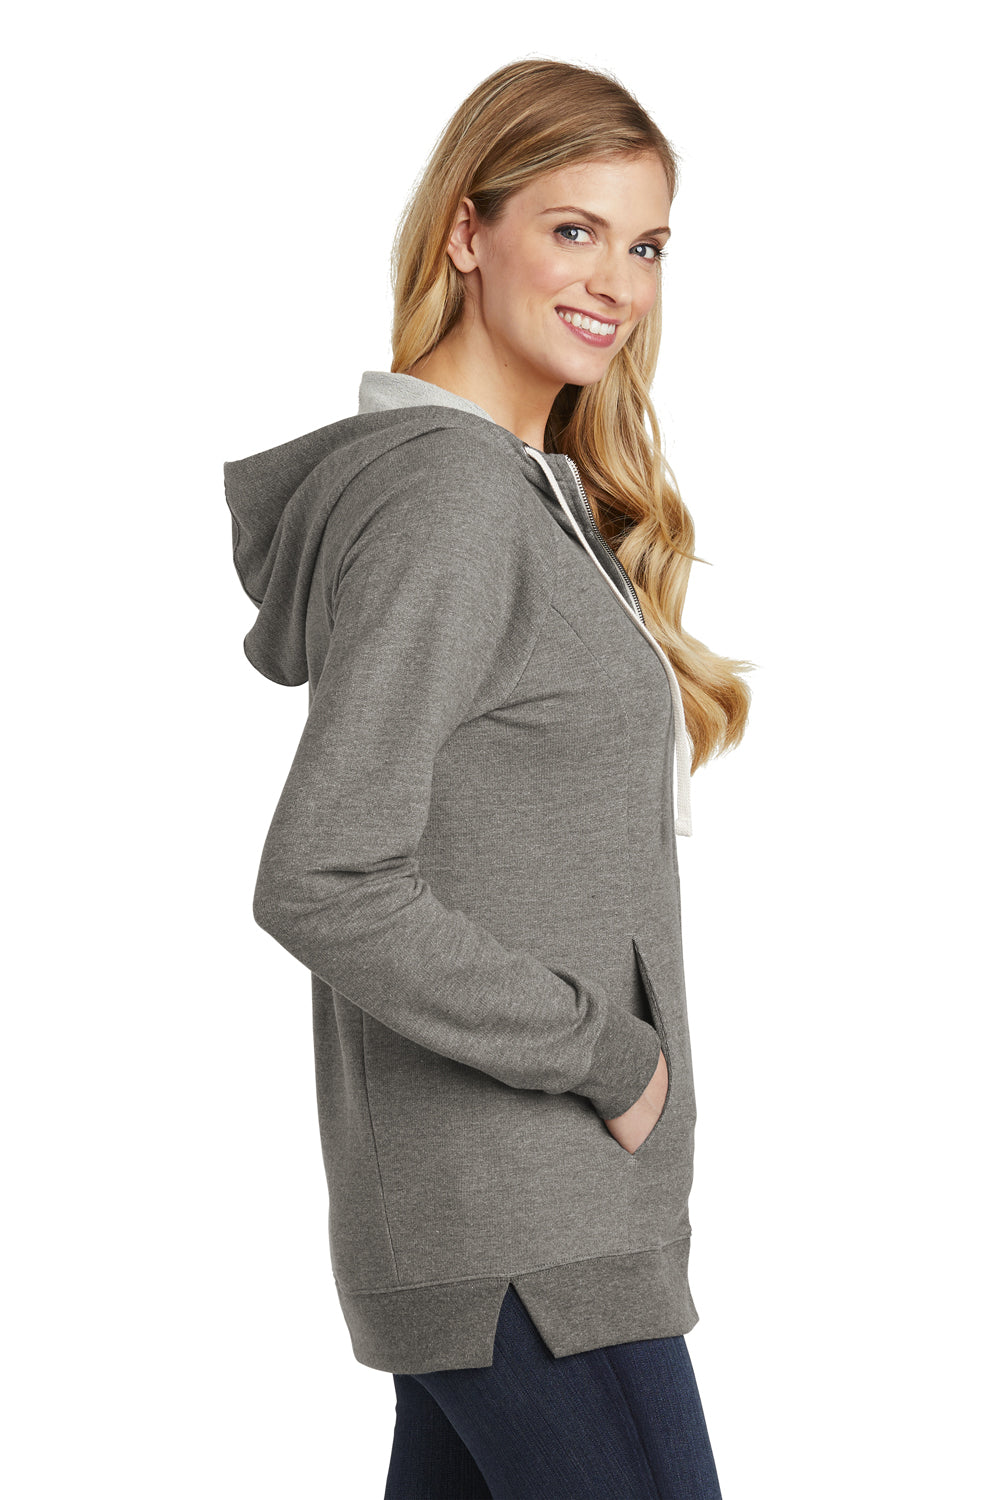 District DT456 Womens Perfect French Terry Full Zip Hooded Sweatshirt Hoodie Grey Side